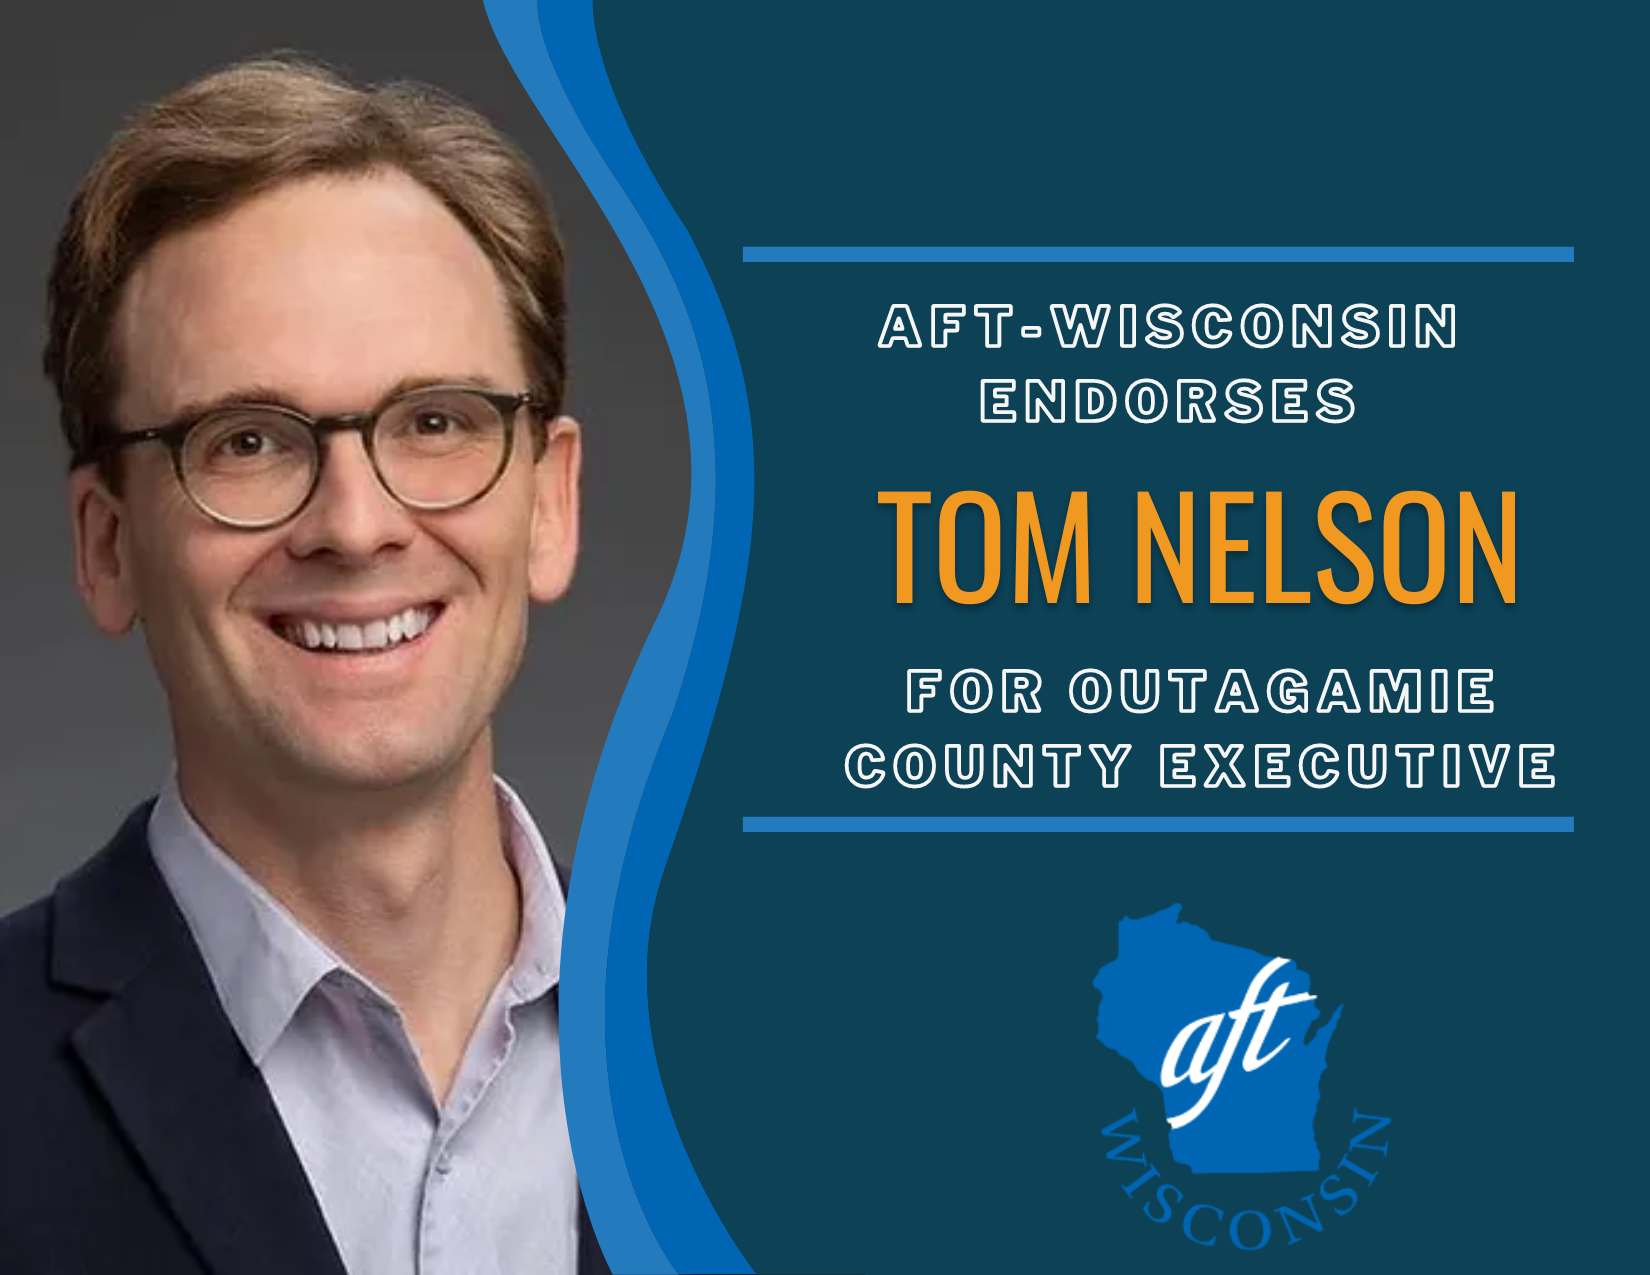 AFT-Wisconsin Endorses Tom Nelson for Outagamie County Executive